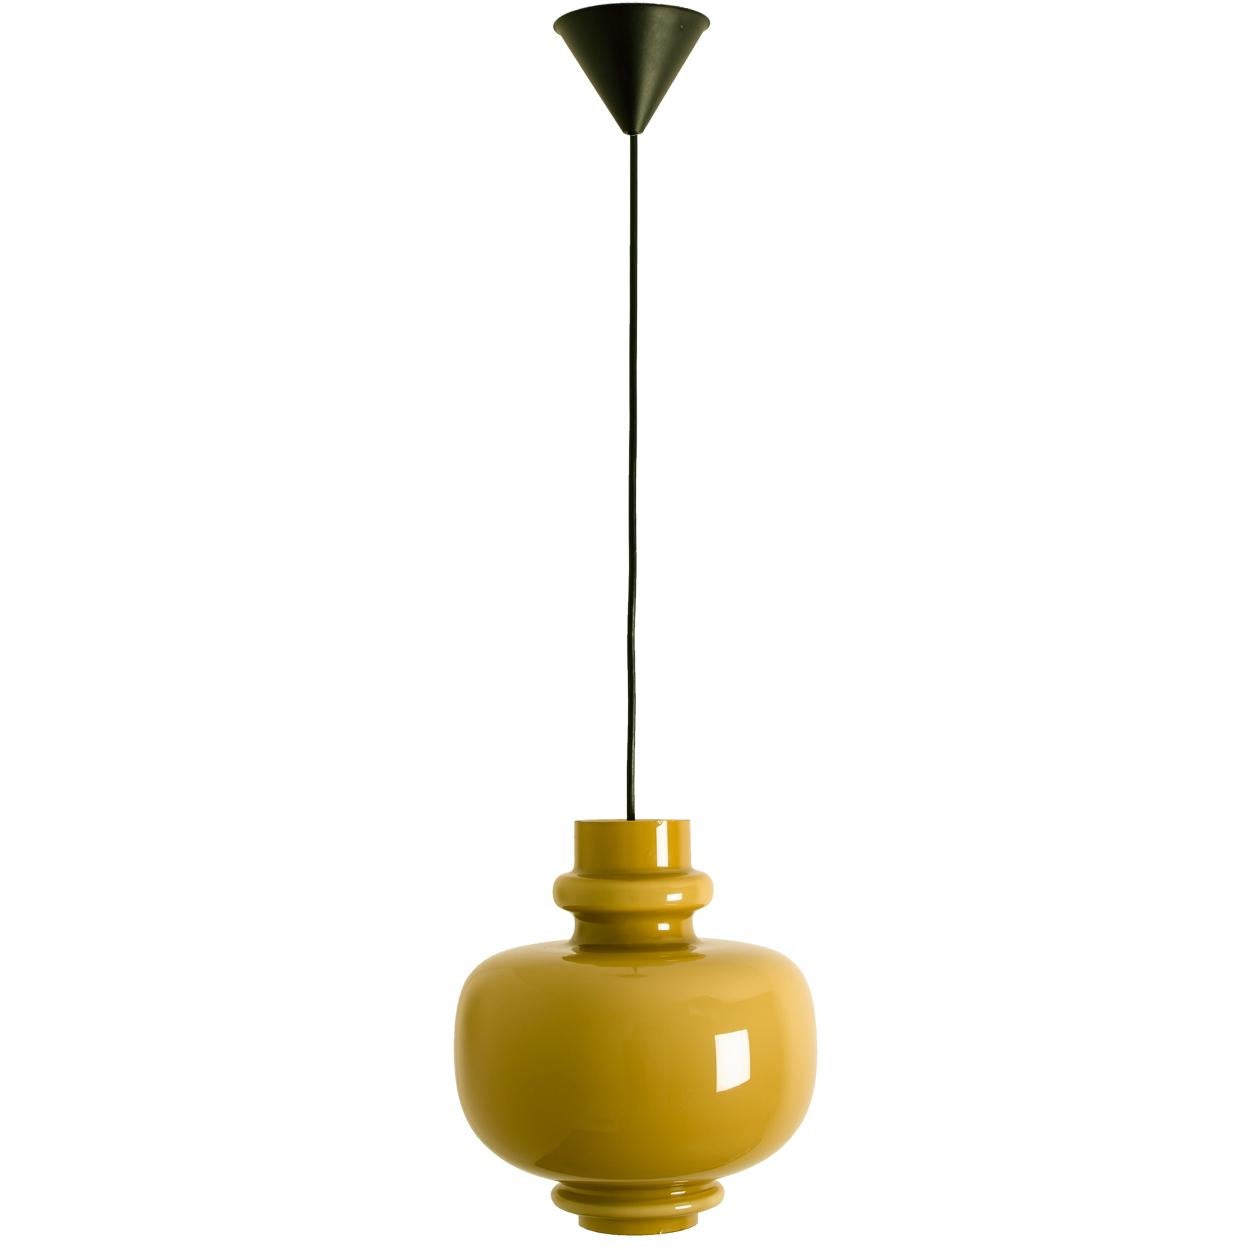 Modernist pendant lamp in light braun-colored opal glass. Designed and designed by H.A. Jacobson for Staff Leuchten, Germany, circa 1960 second half.

Please notice the price is for the pair. We can deliver different canopy's and length/colors of